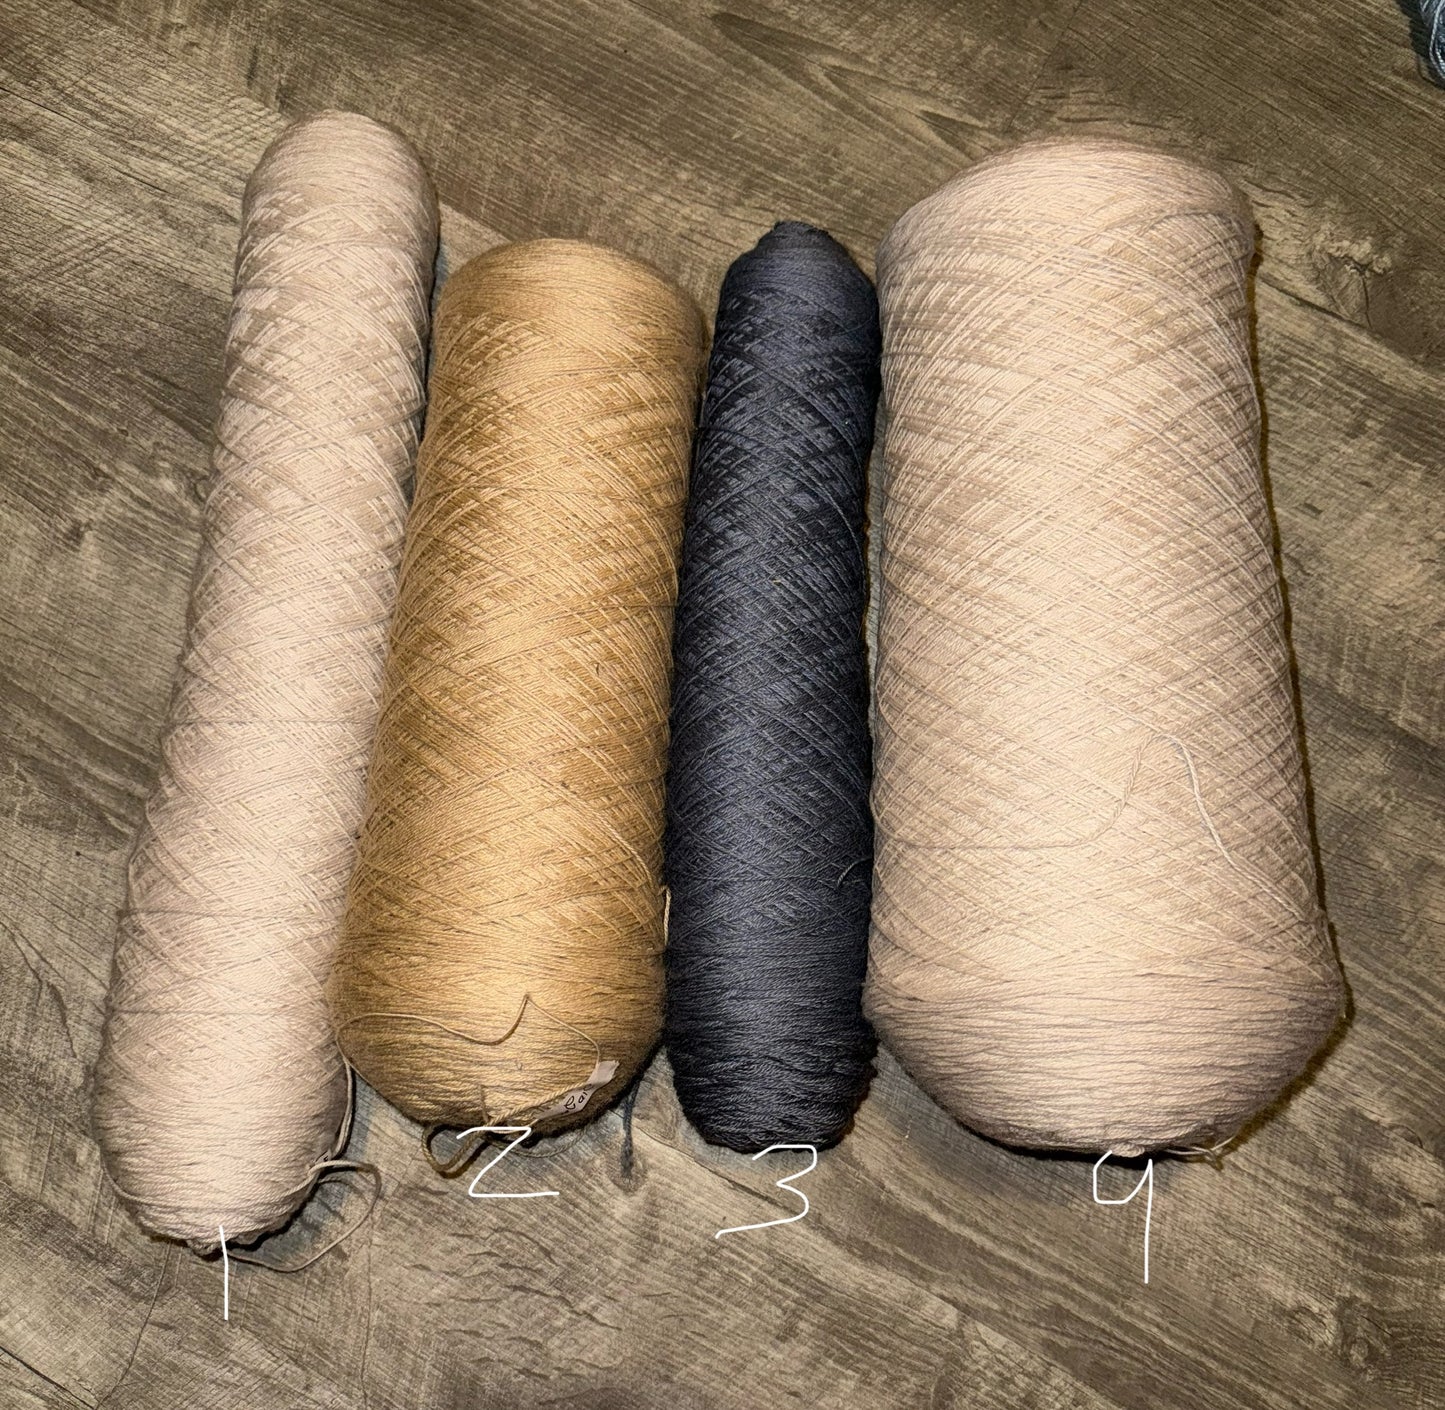 100% CASHMERE baby soft 438yds